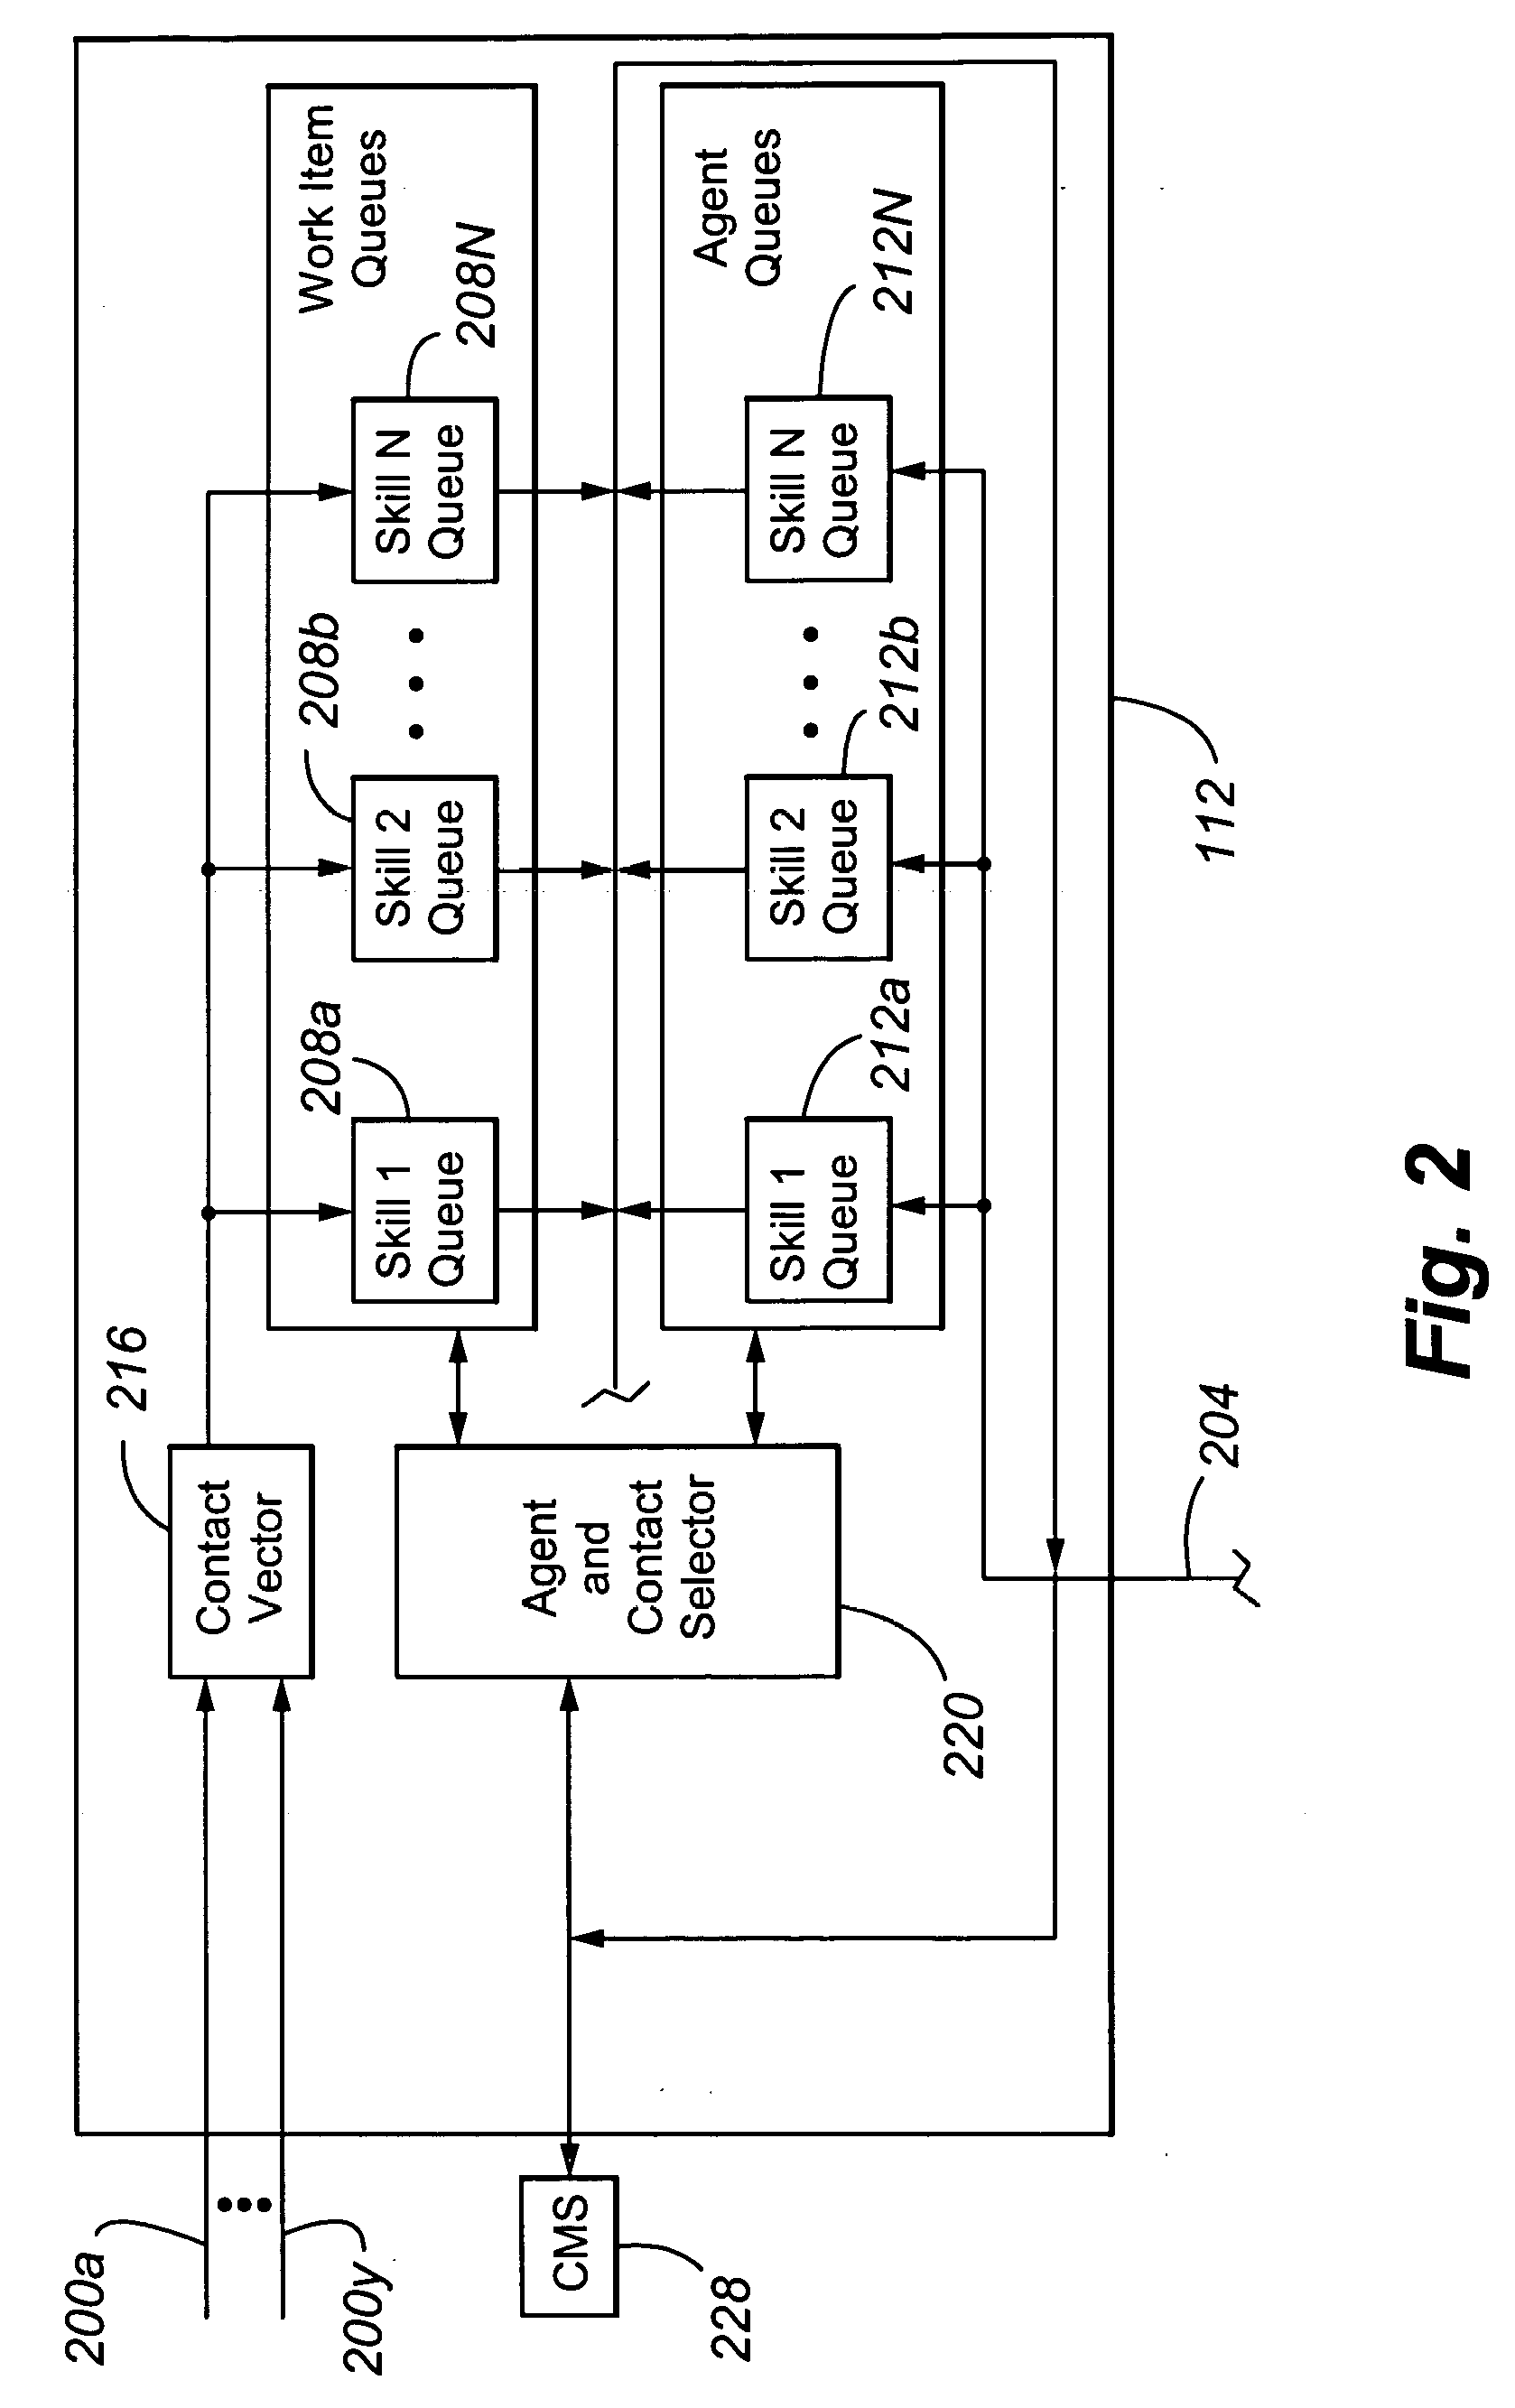 Method and apparatus for global call queue in a global call center